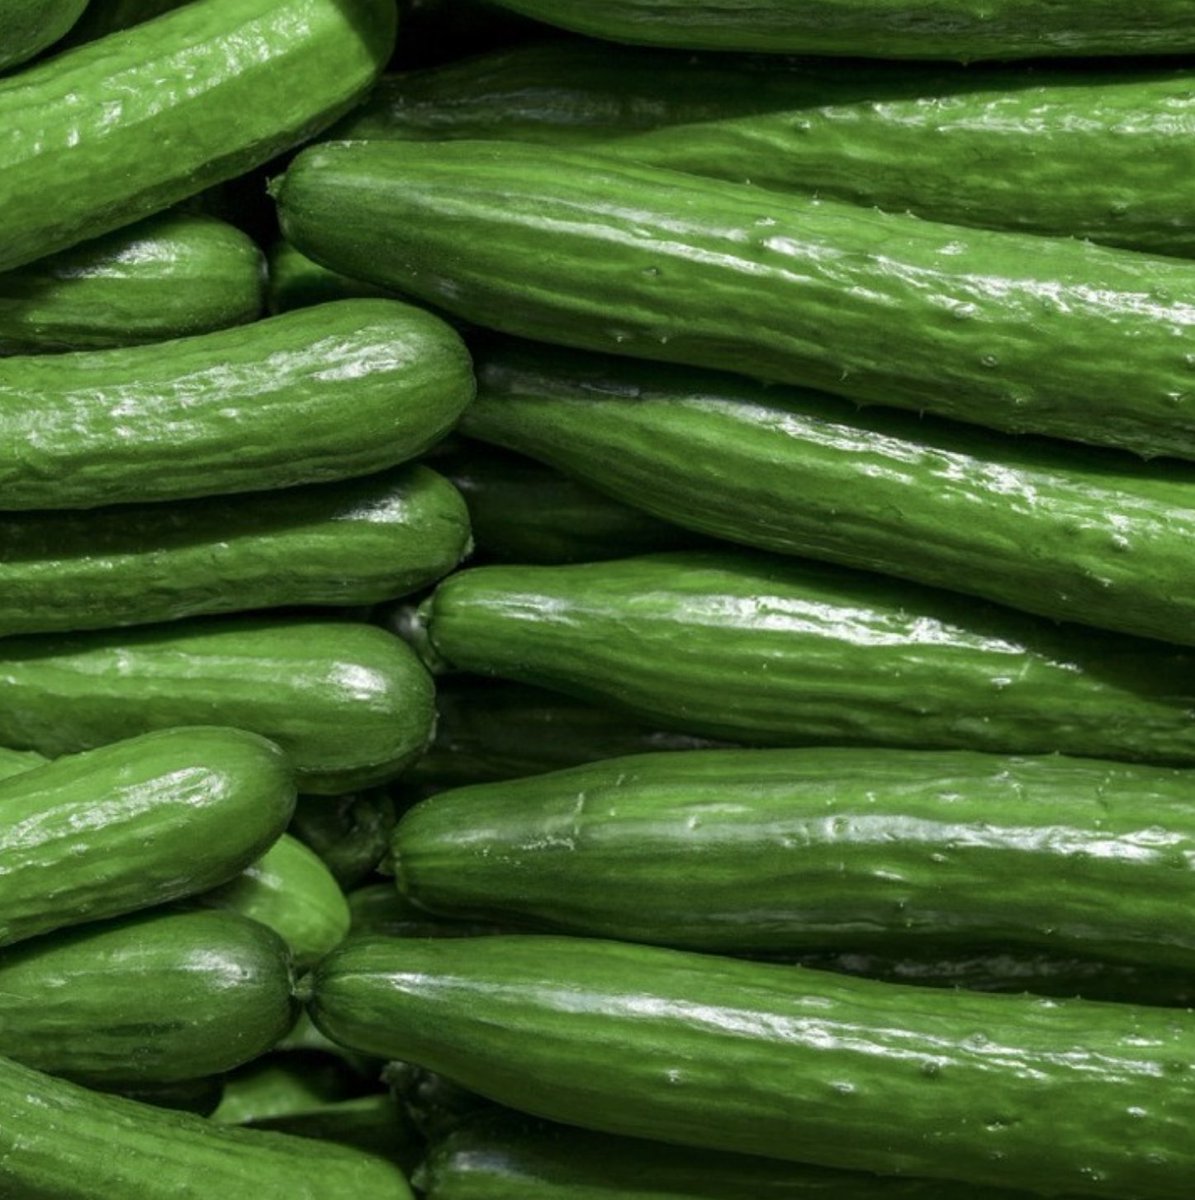 To peel or not to peel, that is the question. The skin of a Cucumber is where most of this superfood’s vitamins & nutrients are stored. High in vitamin K, cucumber skin offers endless benefits. So, keep your peels on! #Repost from @Nature_Fresh